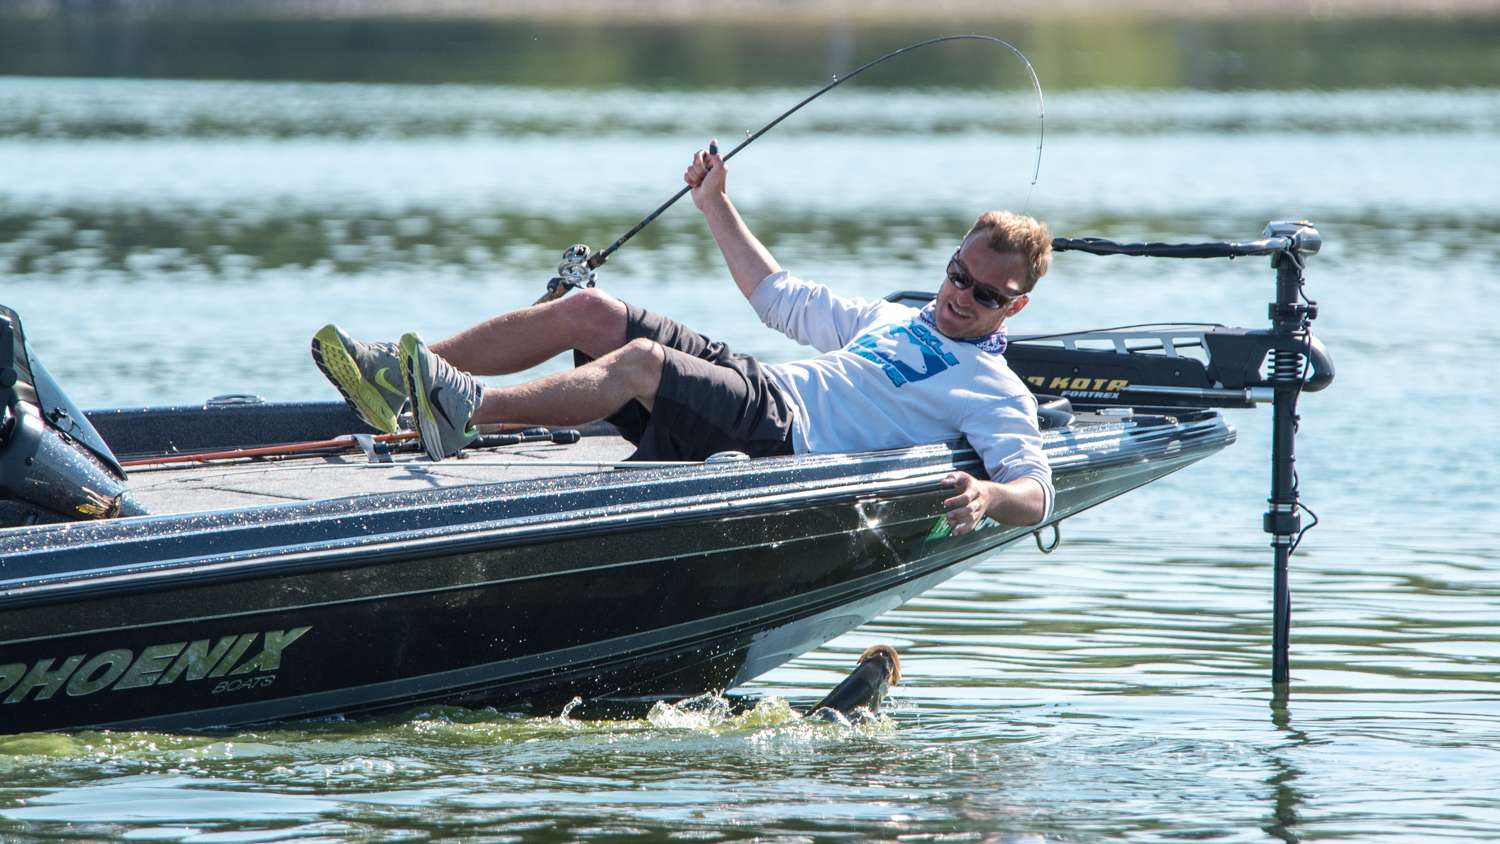 The fish dances along the surface as Carnright goes low to land his catch. 